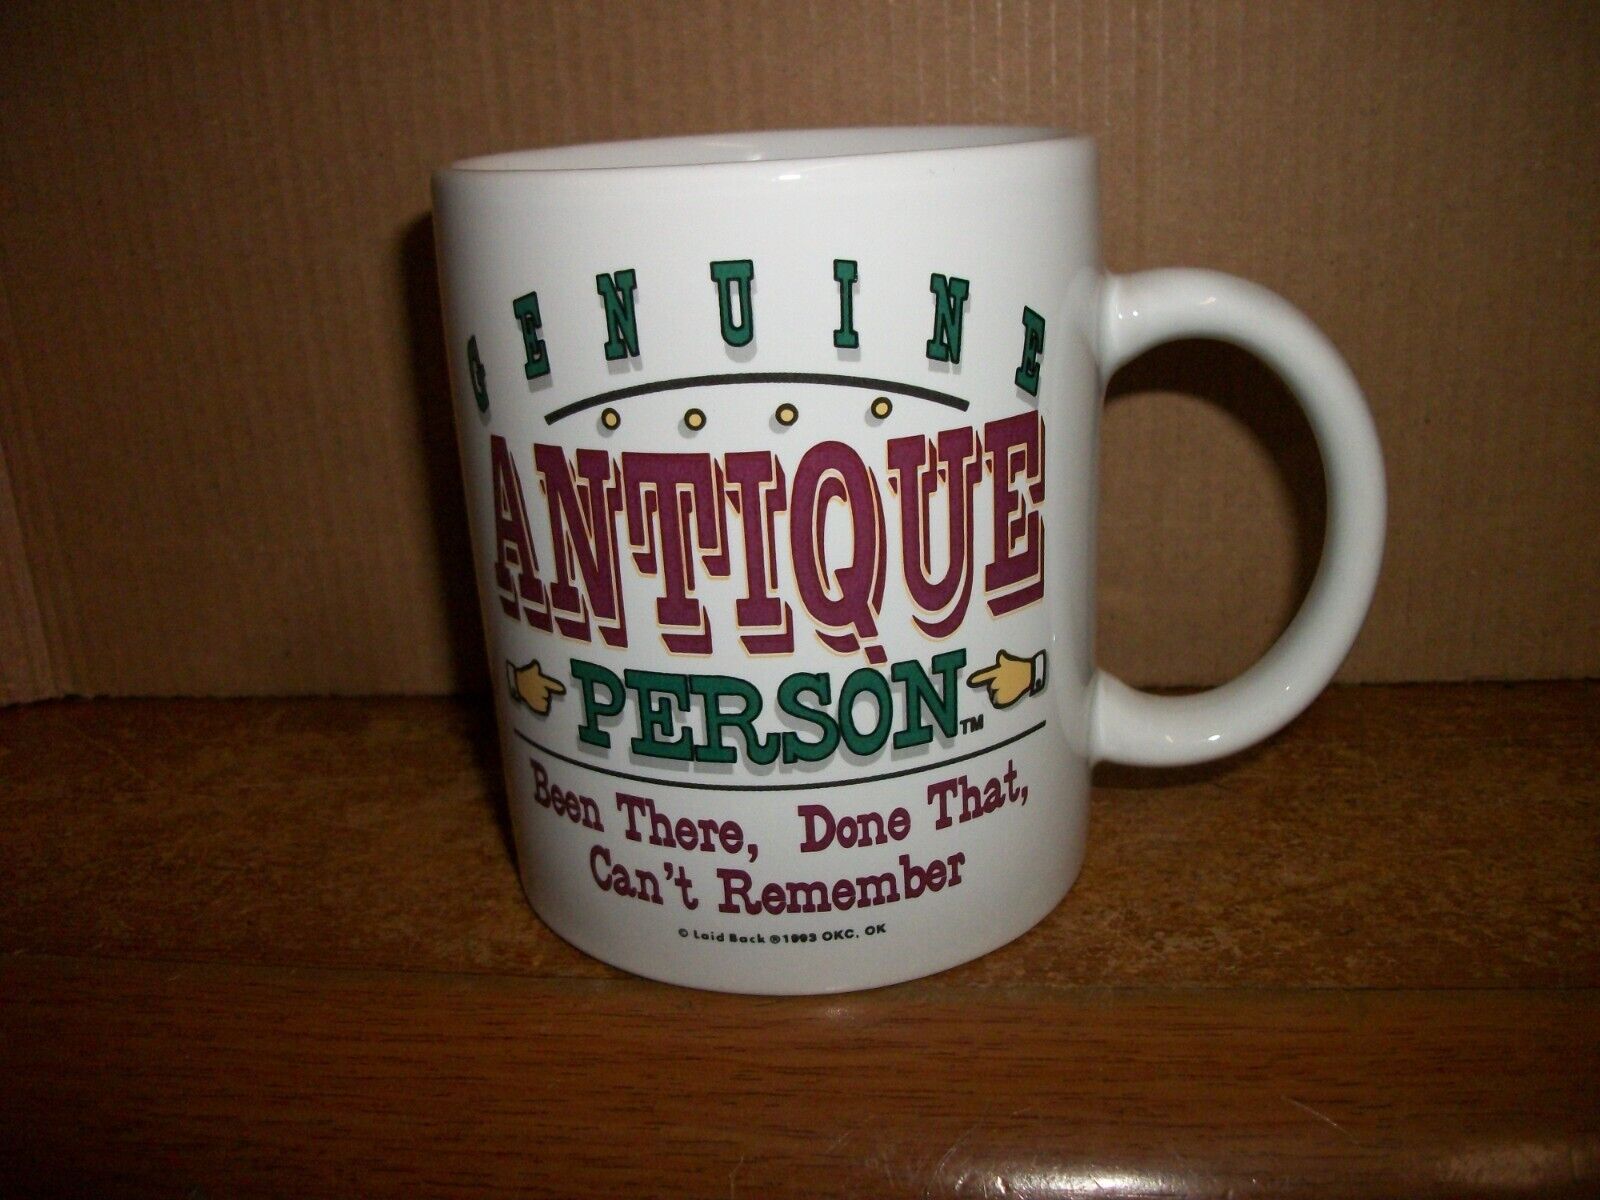 Genuine Antique Person Coffee Mug Been There Done That Can't Remember Cup 10 OZ.